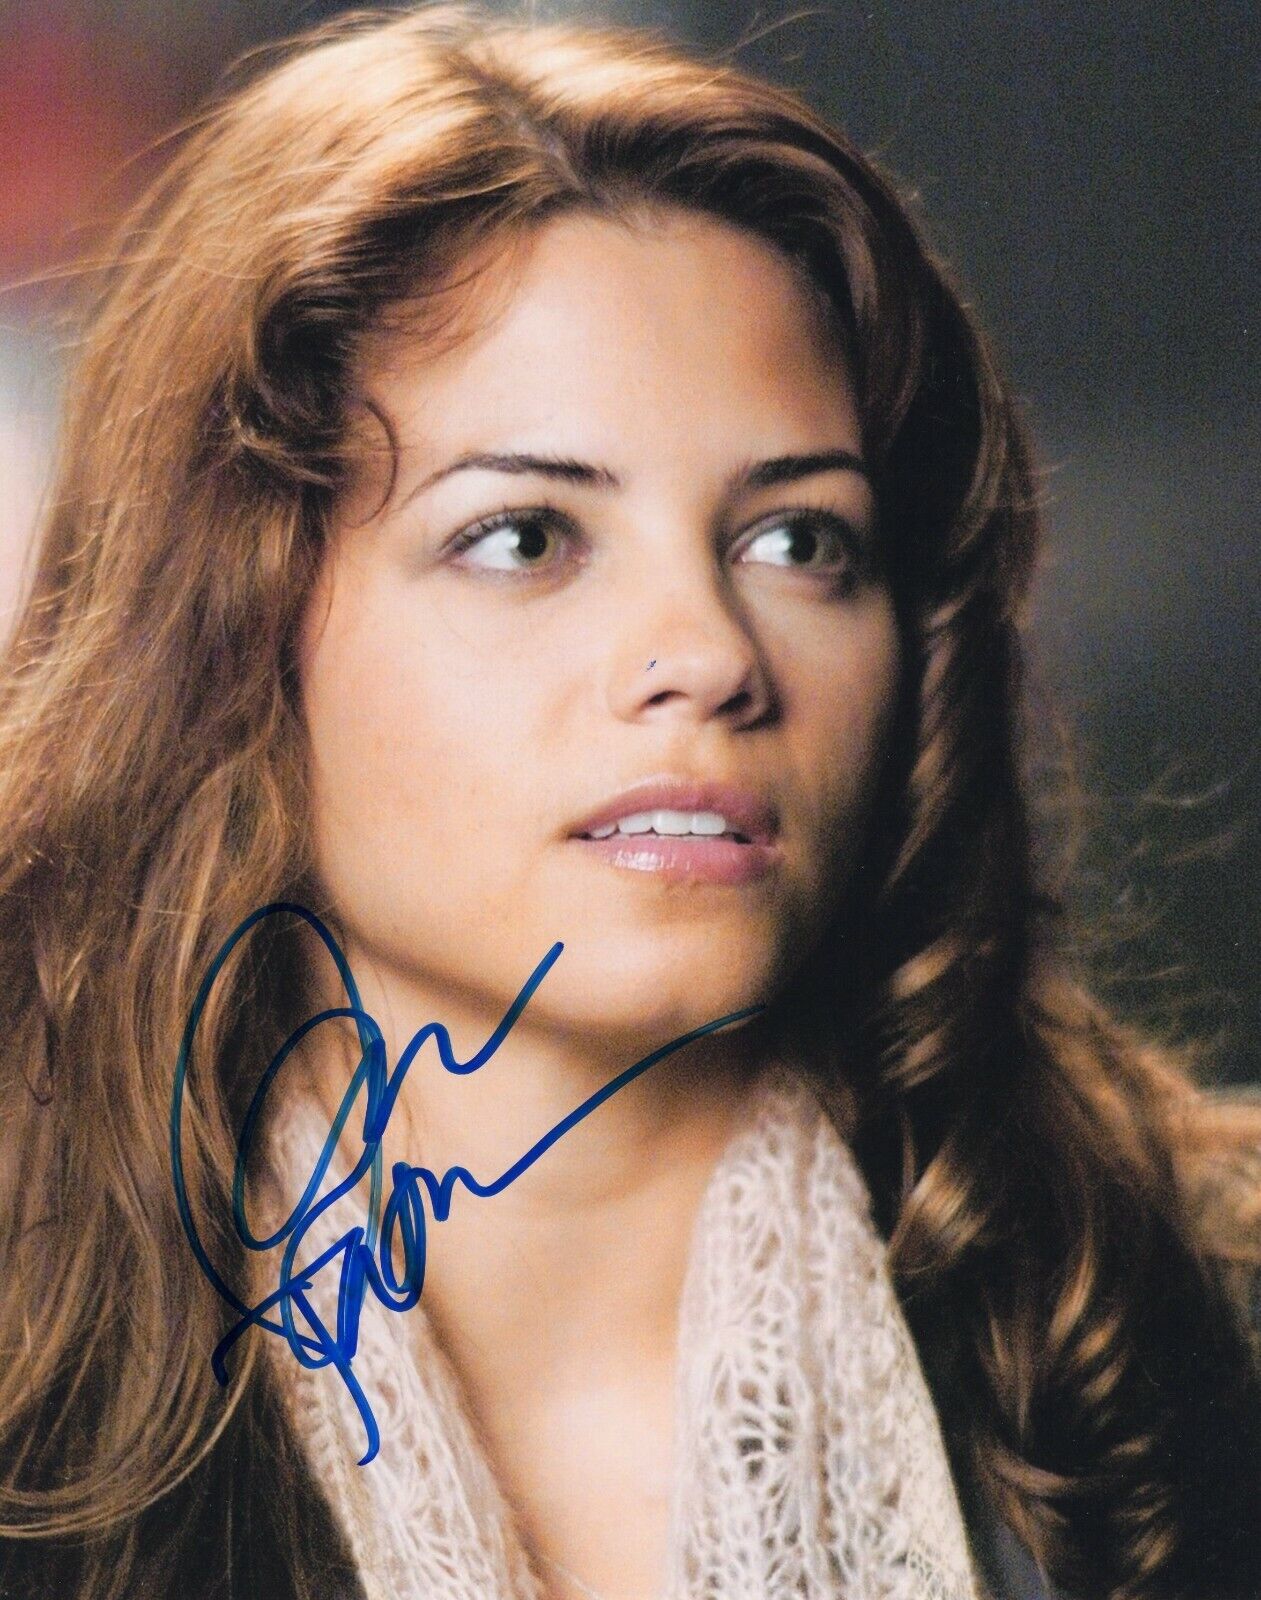 Jenna Dewan Signed 8x10 Photo Poster painting w/COA Step Up The Hot Chick American Virgin